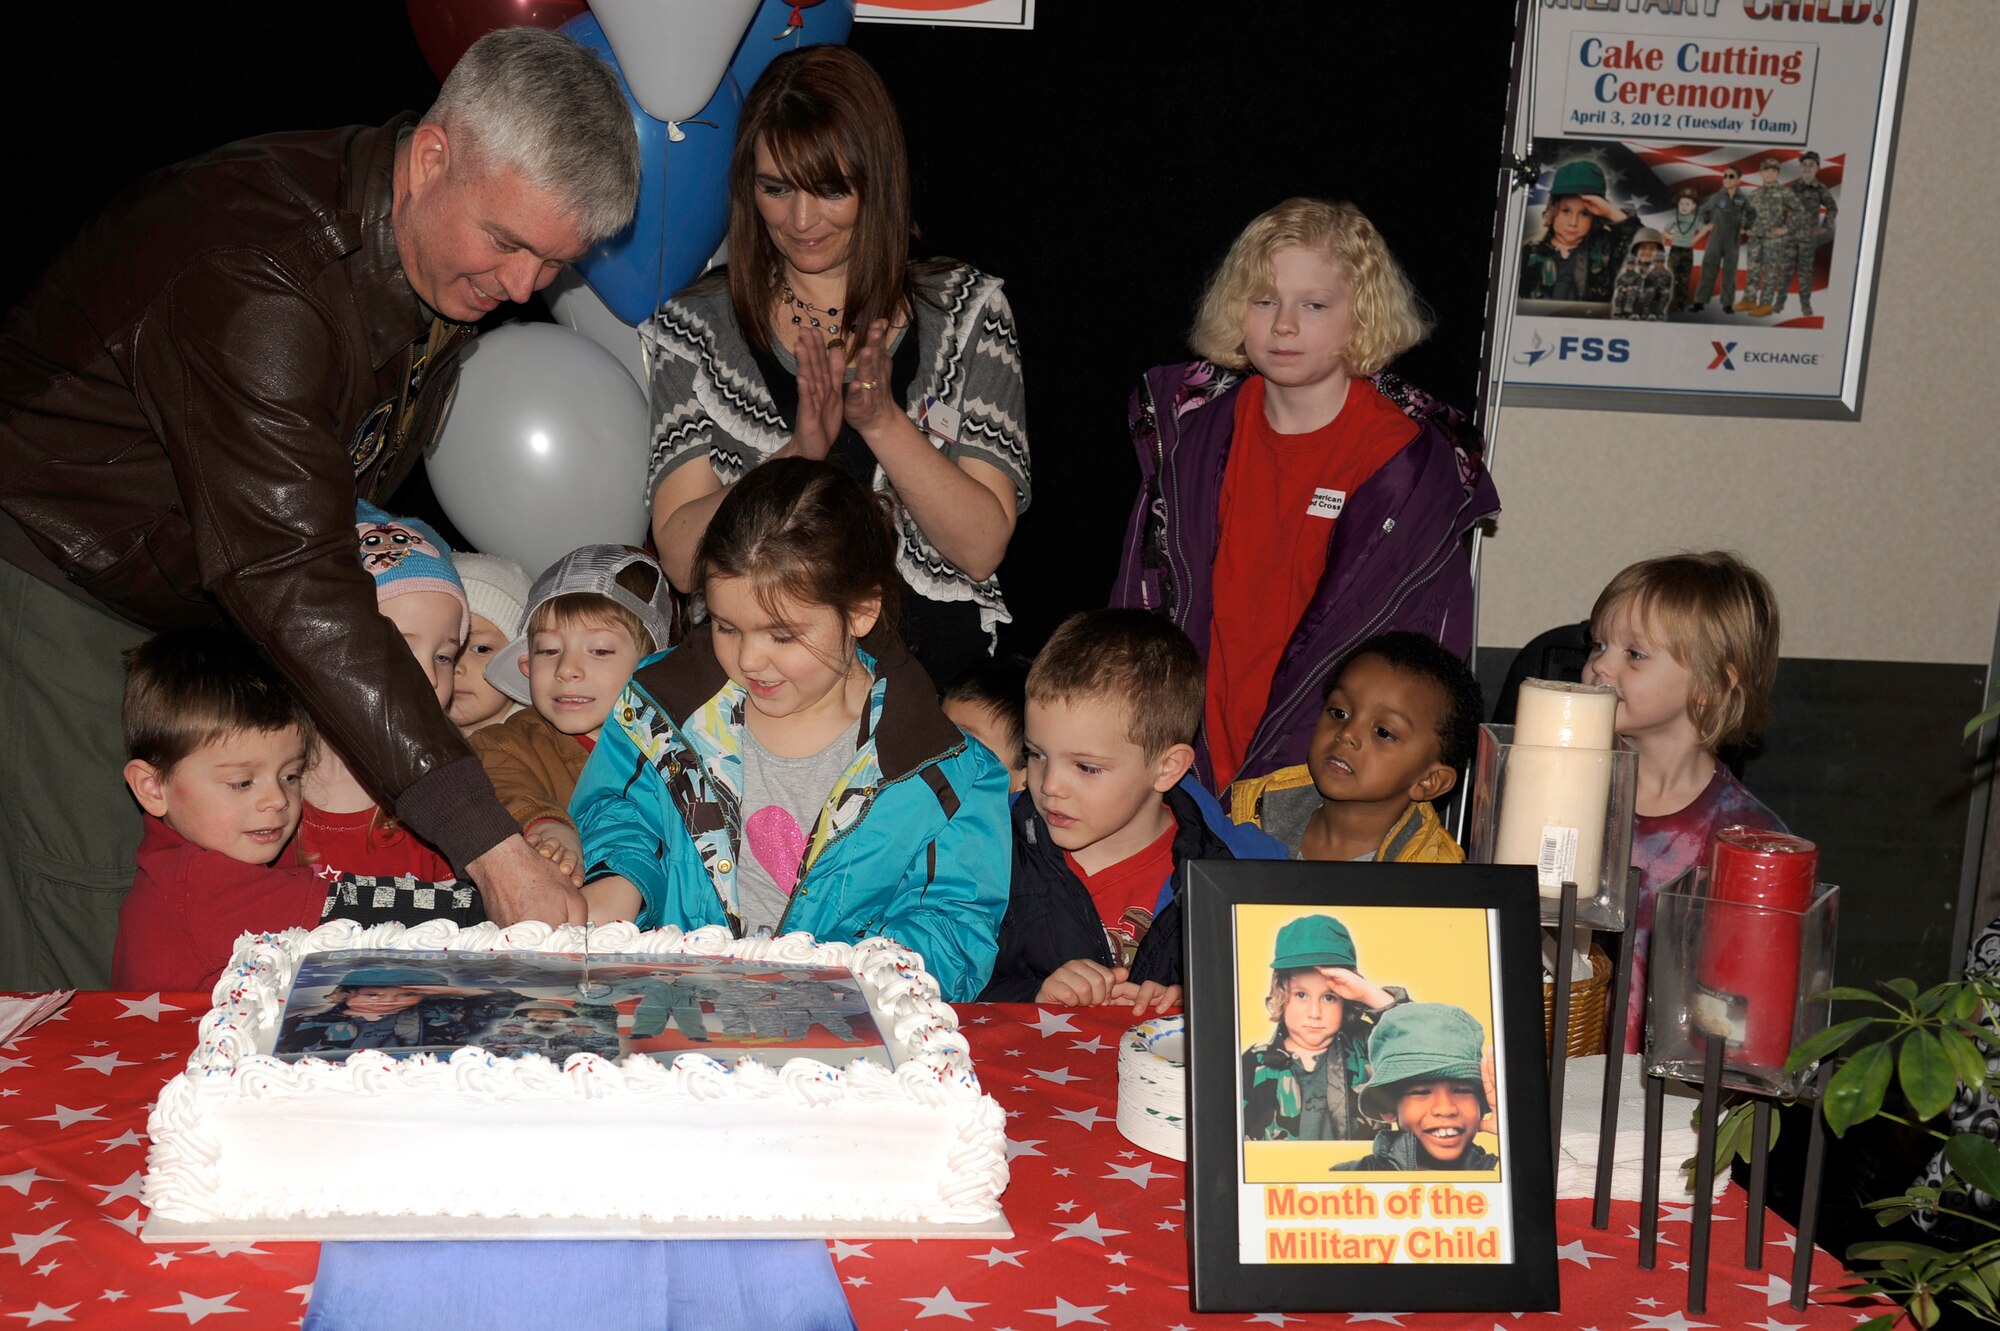 U.S. Air Force Col. Al Wimmer, 35th Fighter Wing vice commander, joins military children as they cut a cake during the Month of the Military Child kick-off ceremony at the Exchange on Misawa Air Base, Japan, April 3, 2012. In 1986 Defense Secretary Casper Weinberger designated April as the Month of the Military Child to honor military kids for their sacrifices and courage. (U.S. Air Force photo by Tech. Sgt. Marie Brown/Released)